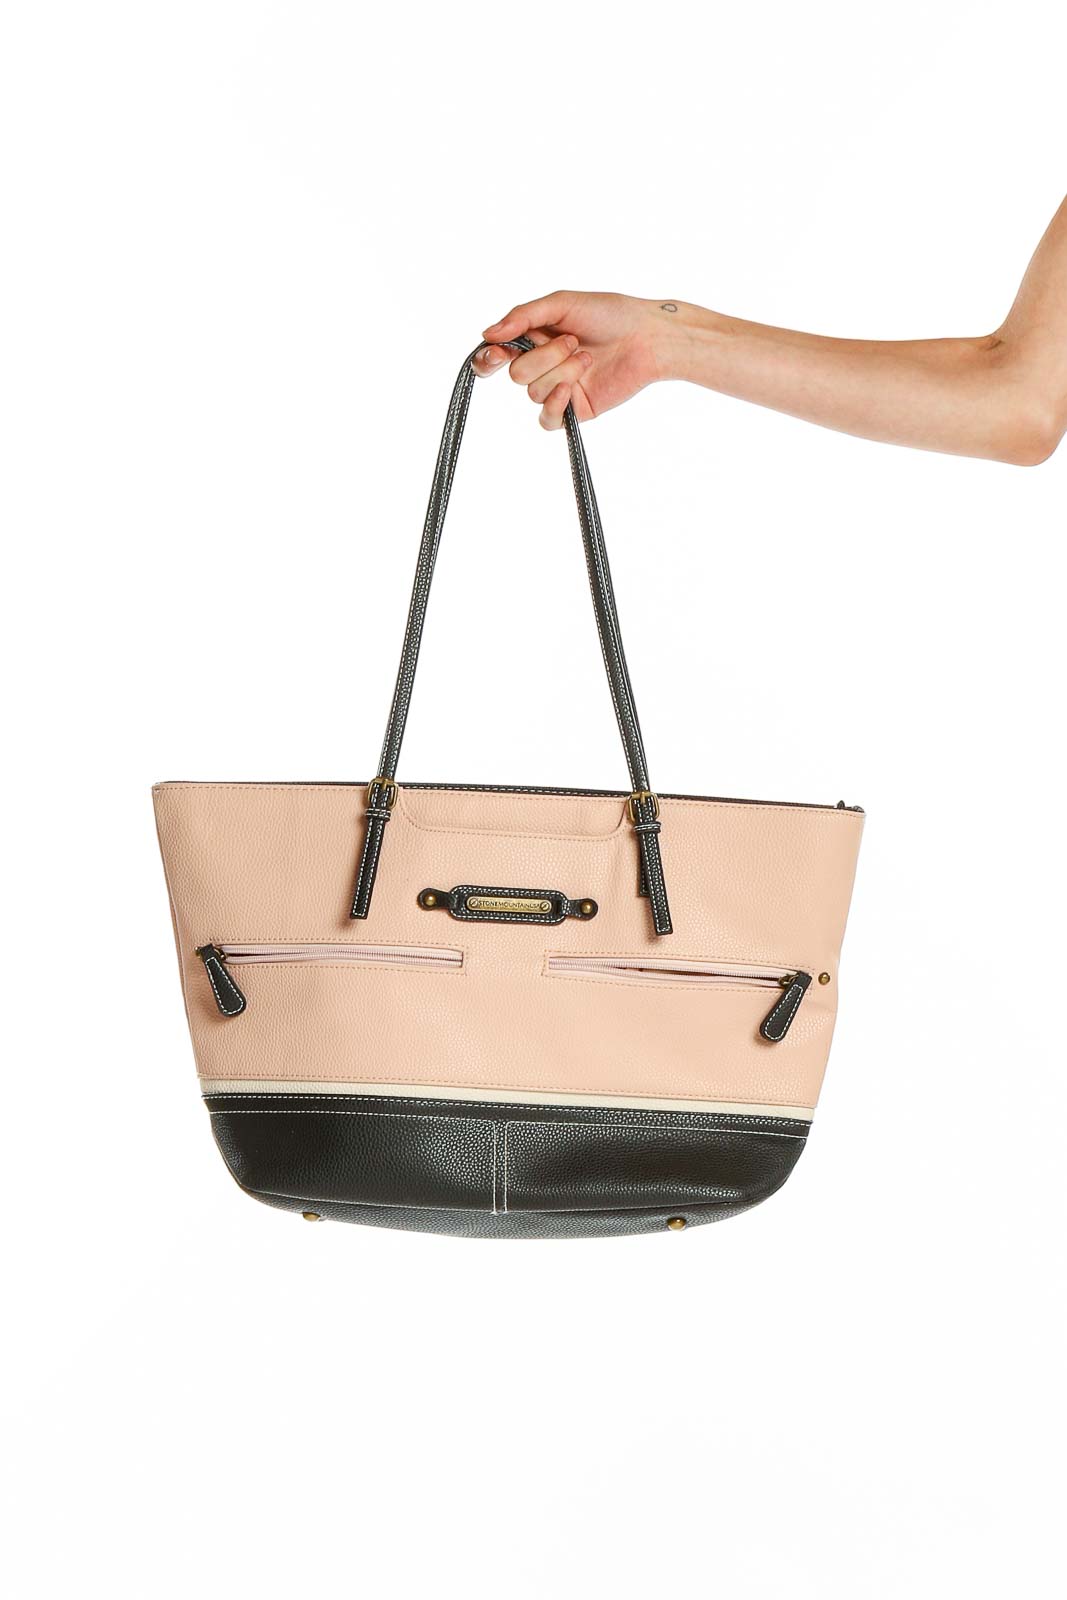 Pink Tote Bag Front